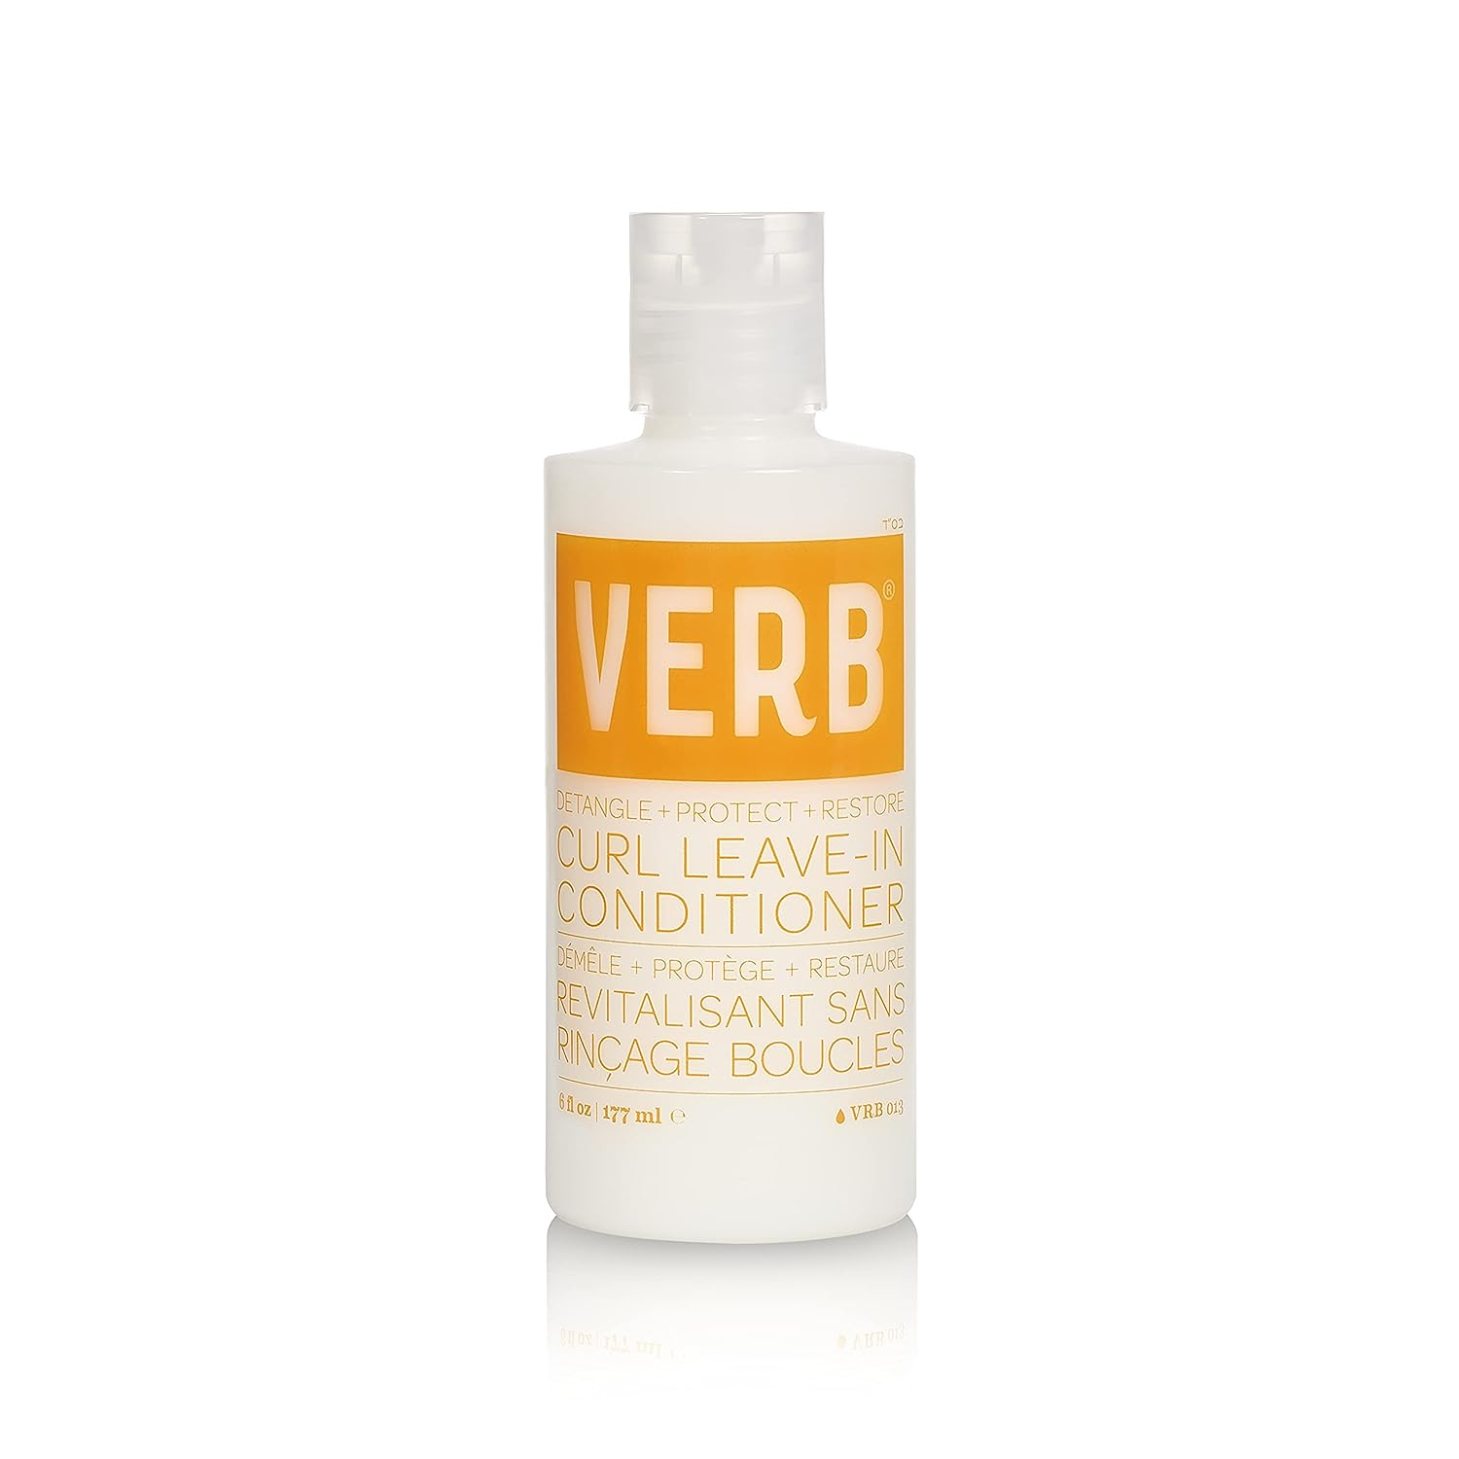 A bottle of verb leave in conditioner for curly hair